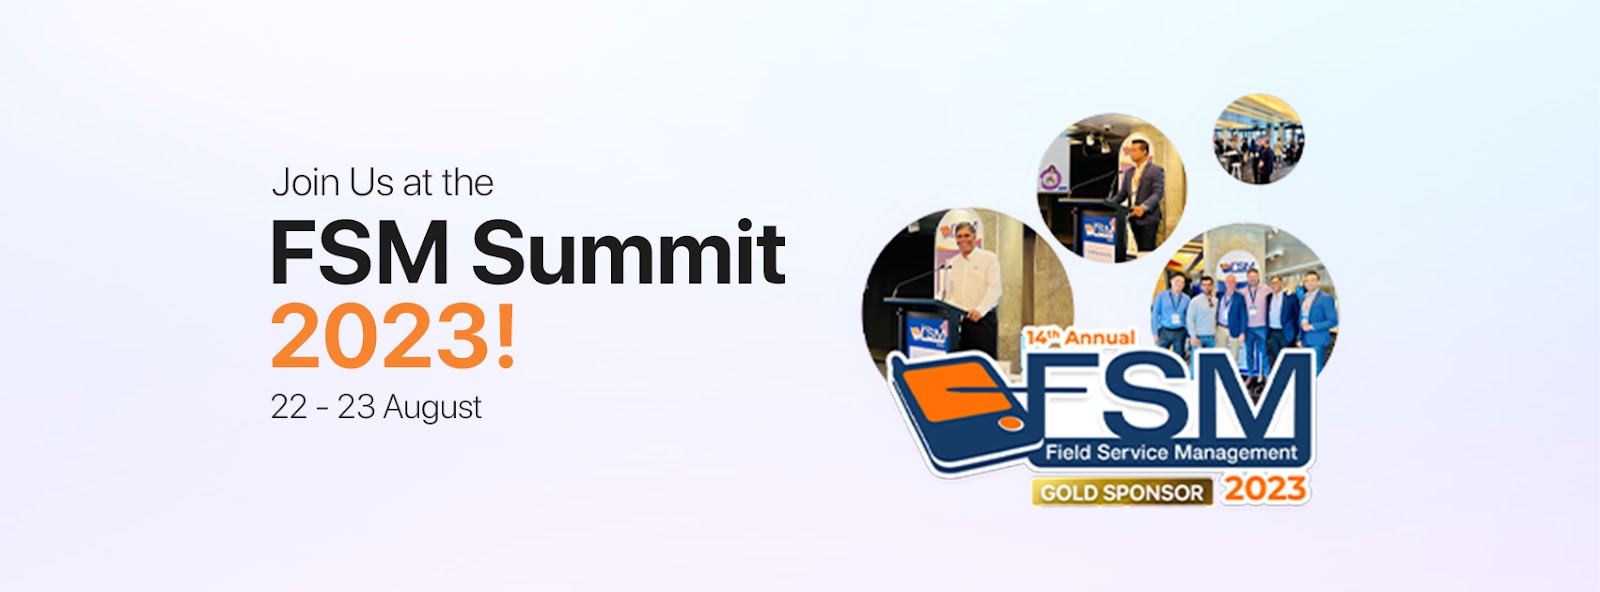 Join us at the FSM Summit 2023